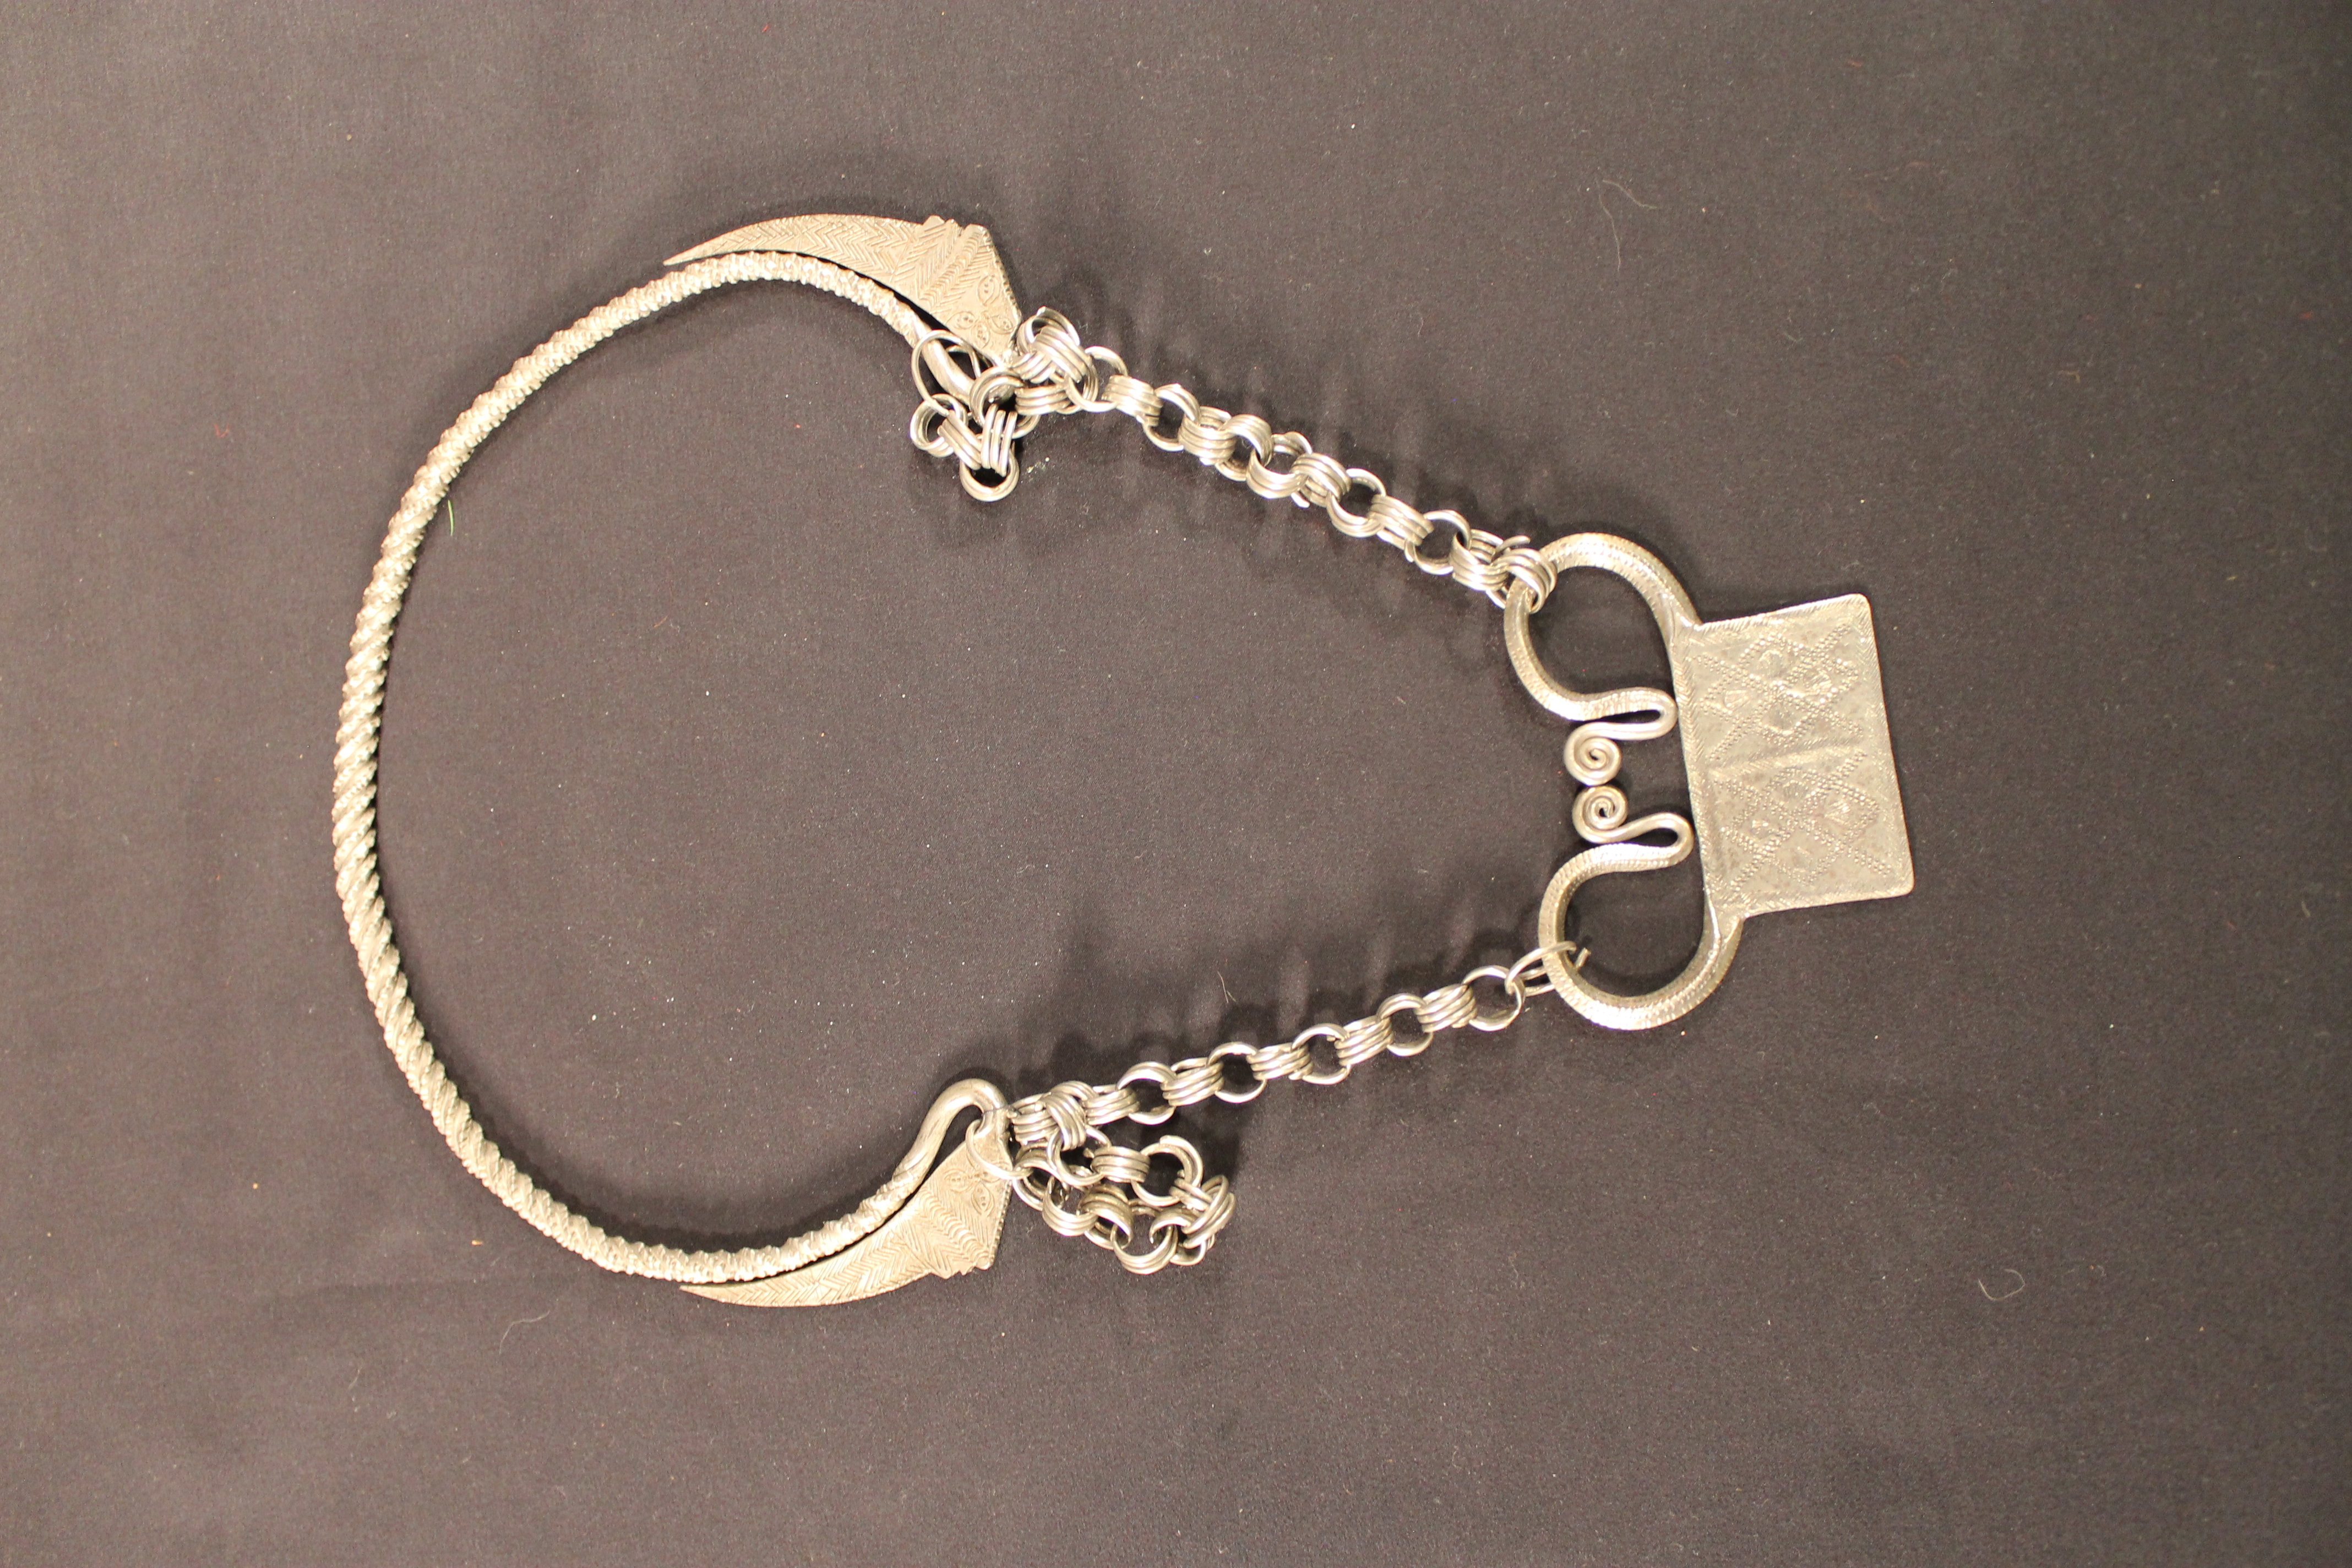 Box-shaped amulet with two large loops connecting it to a linking chain in the middle connecting the amulet's two large loops. Around the back of the necklace is a rope of silver metal. 